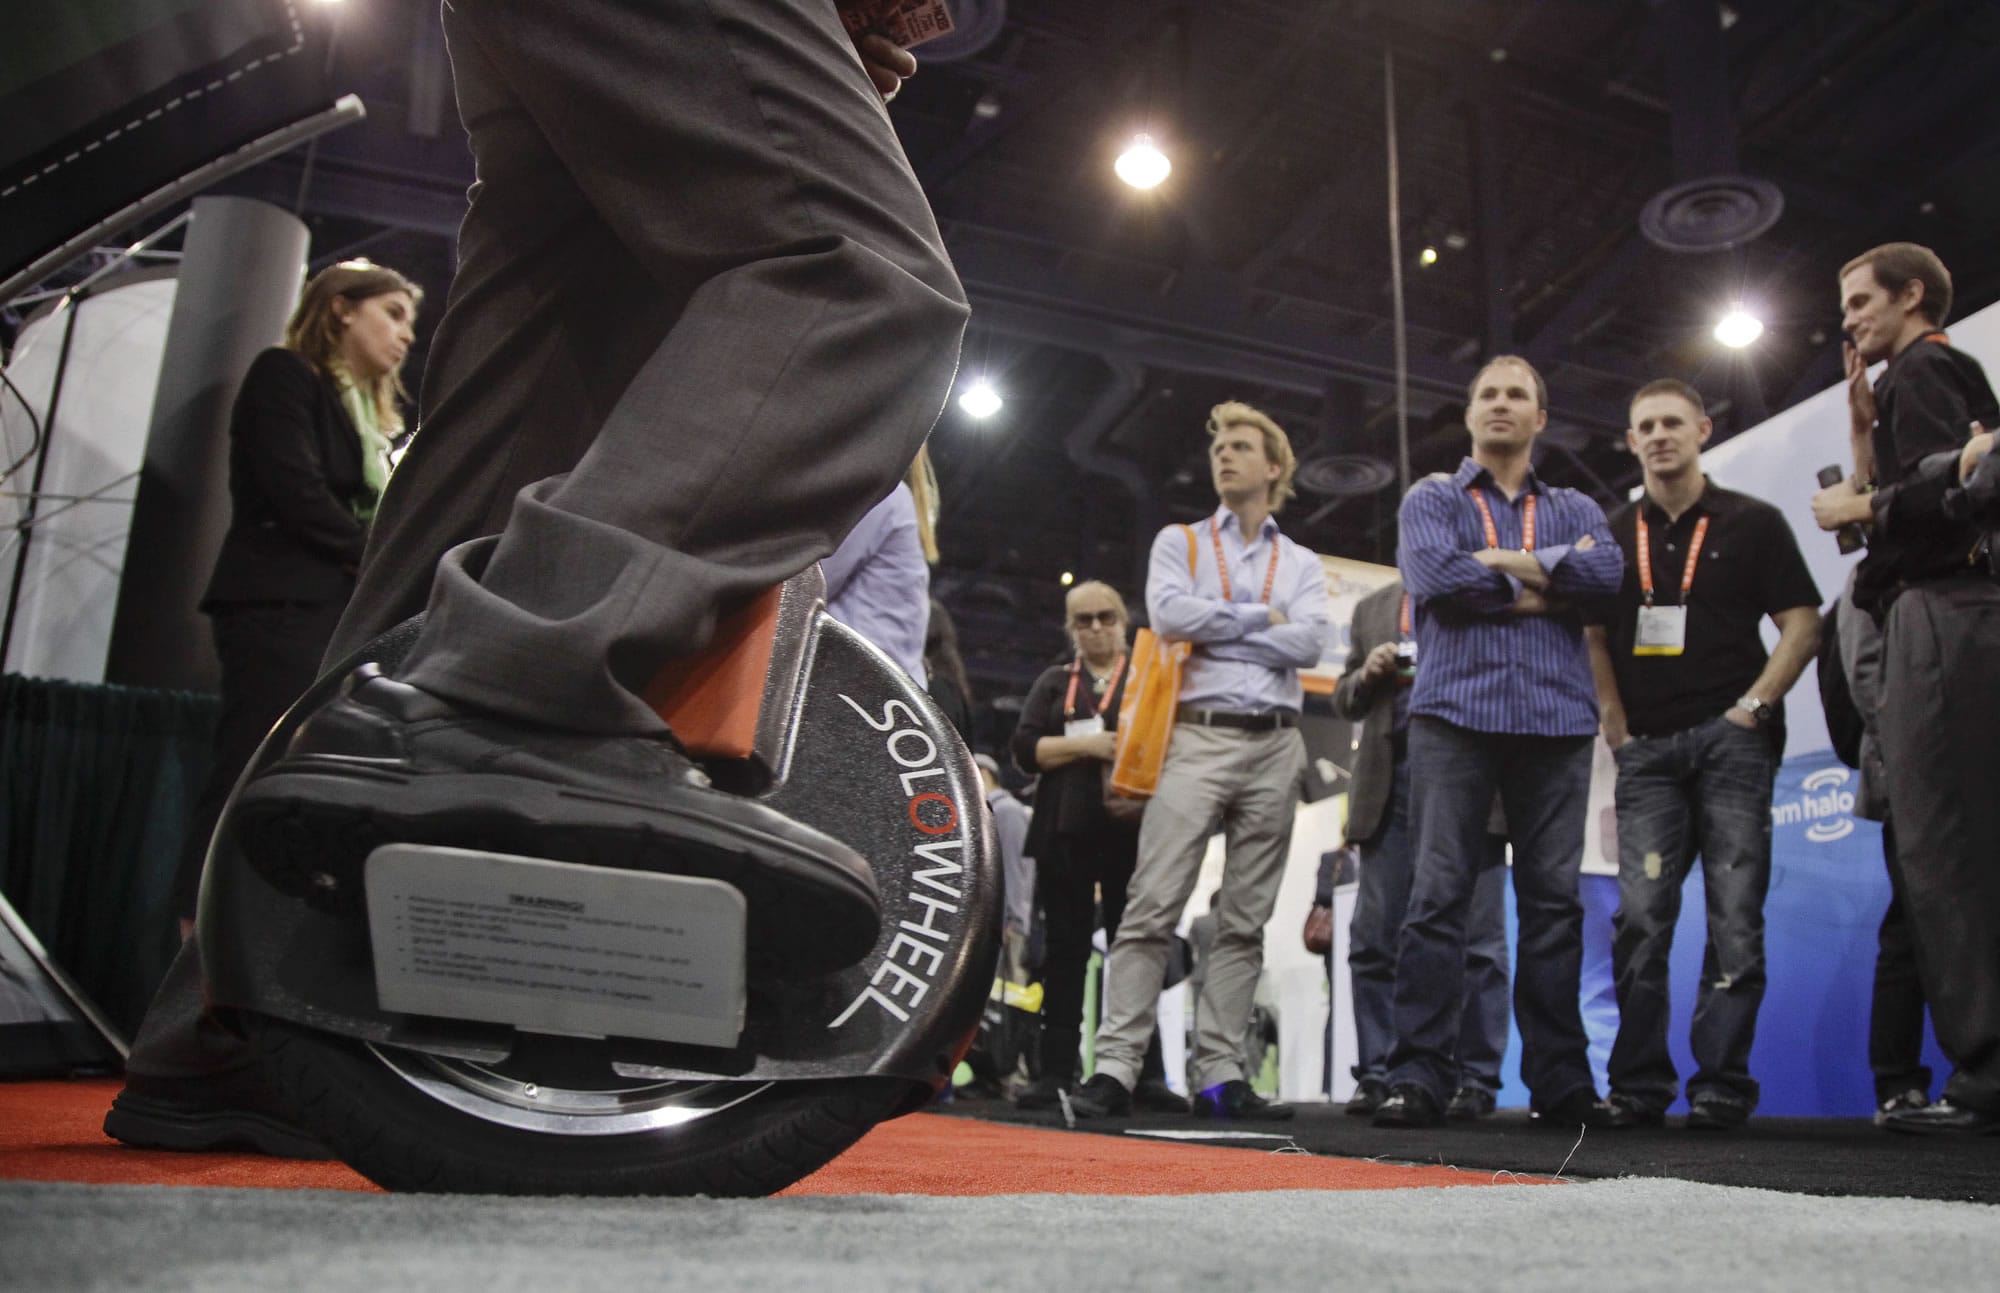 An exhibitor demonstrates a Solowheel at the 2012 International Consumer Electronics Show in Las Vegas.